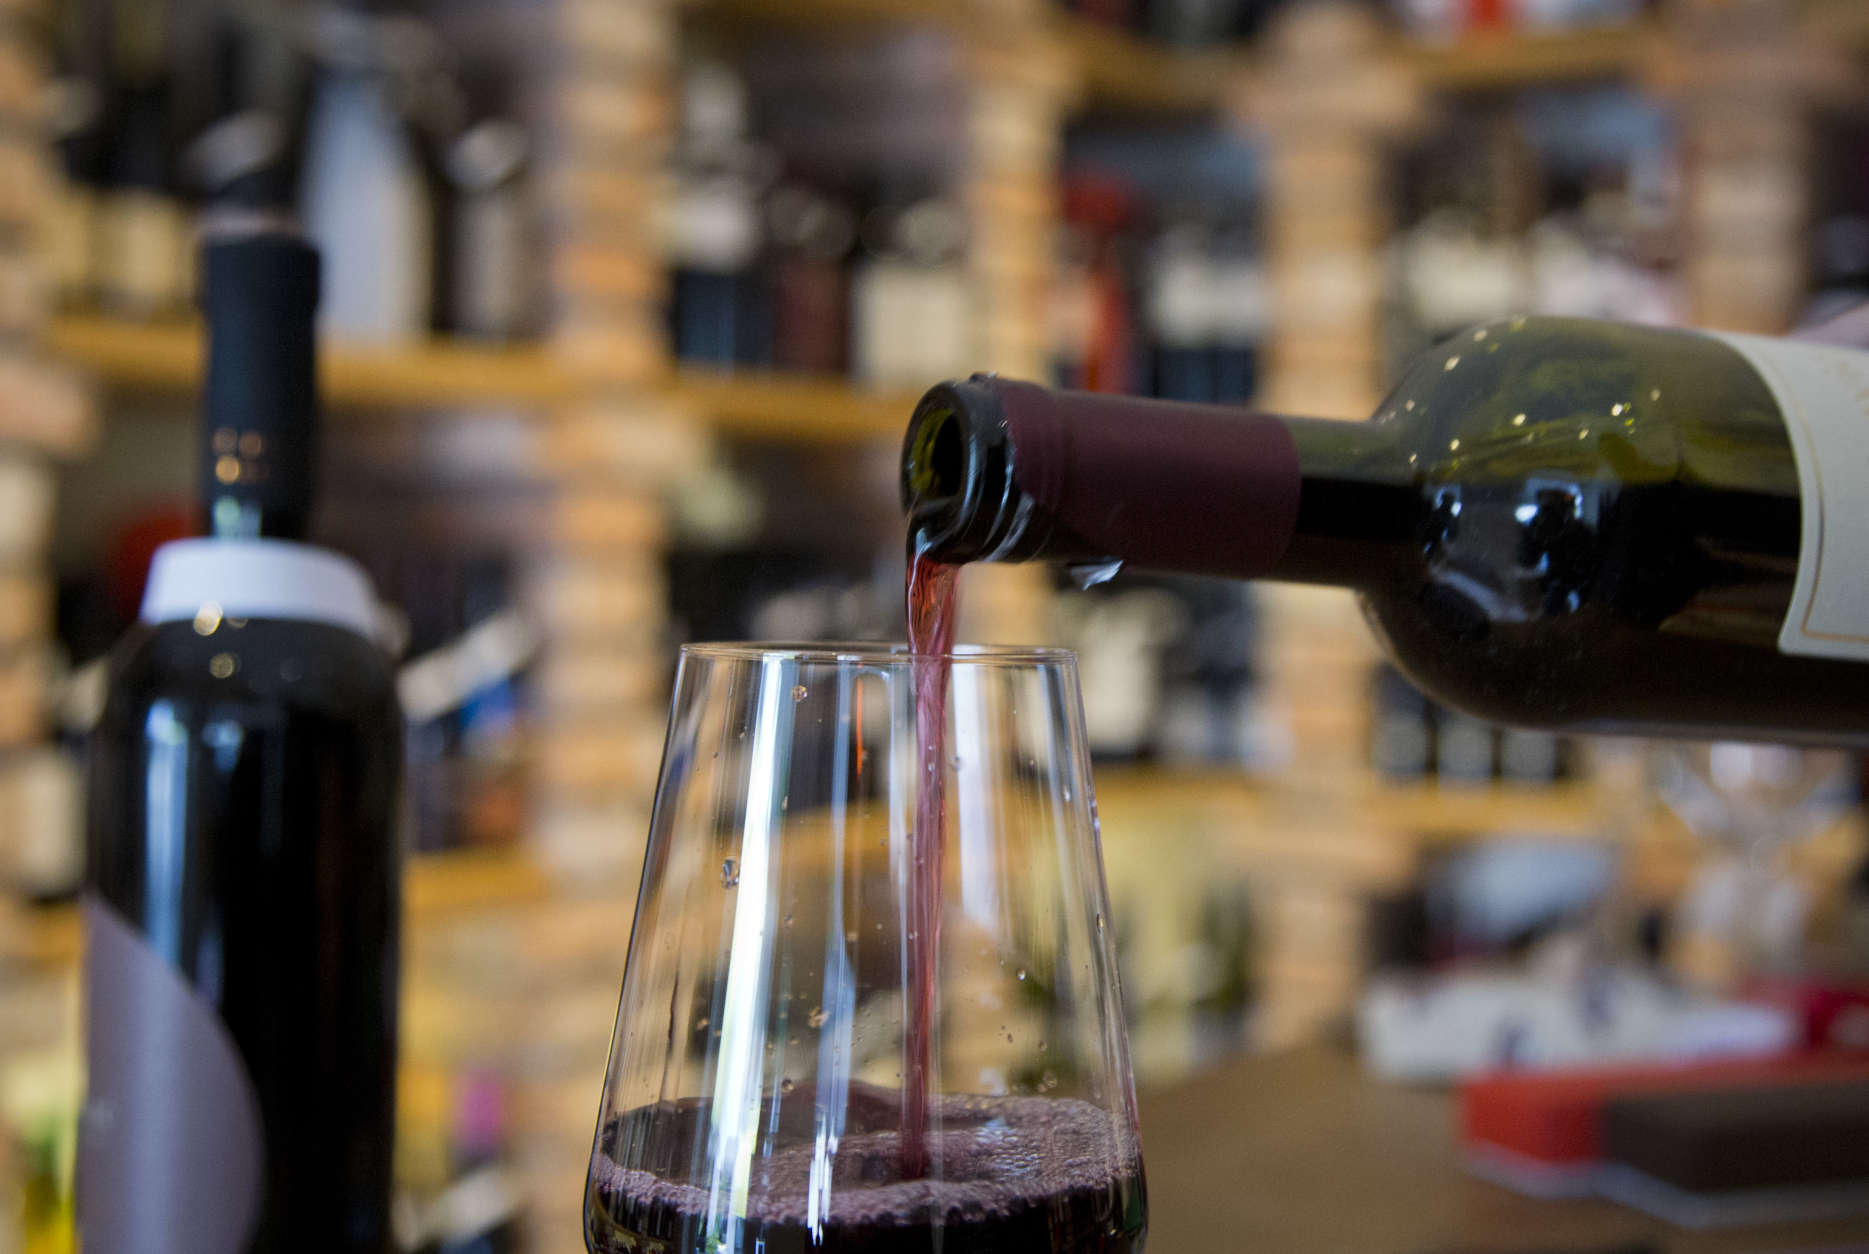 Red wine is poured into a glass at a wine shop in Zagreb, Croatia, Wednesday, March 1, 2017. Slovenian winemakers have warned the EU that Croatia has presented "forged" documents while getting a permission to use the Teran wine brand in the 28-nation bloc. Neighboring EU members Slovenia and Croatia have long been at odds over the use of the Teran red wine name. (AP Photo/Darko Bandic)